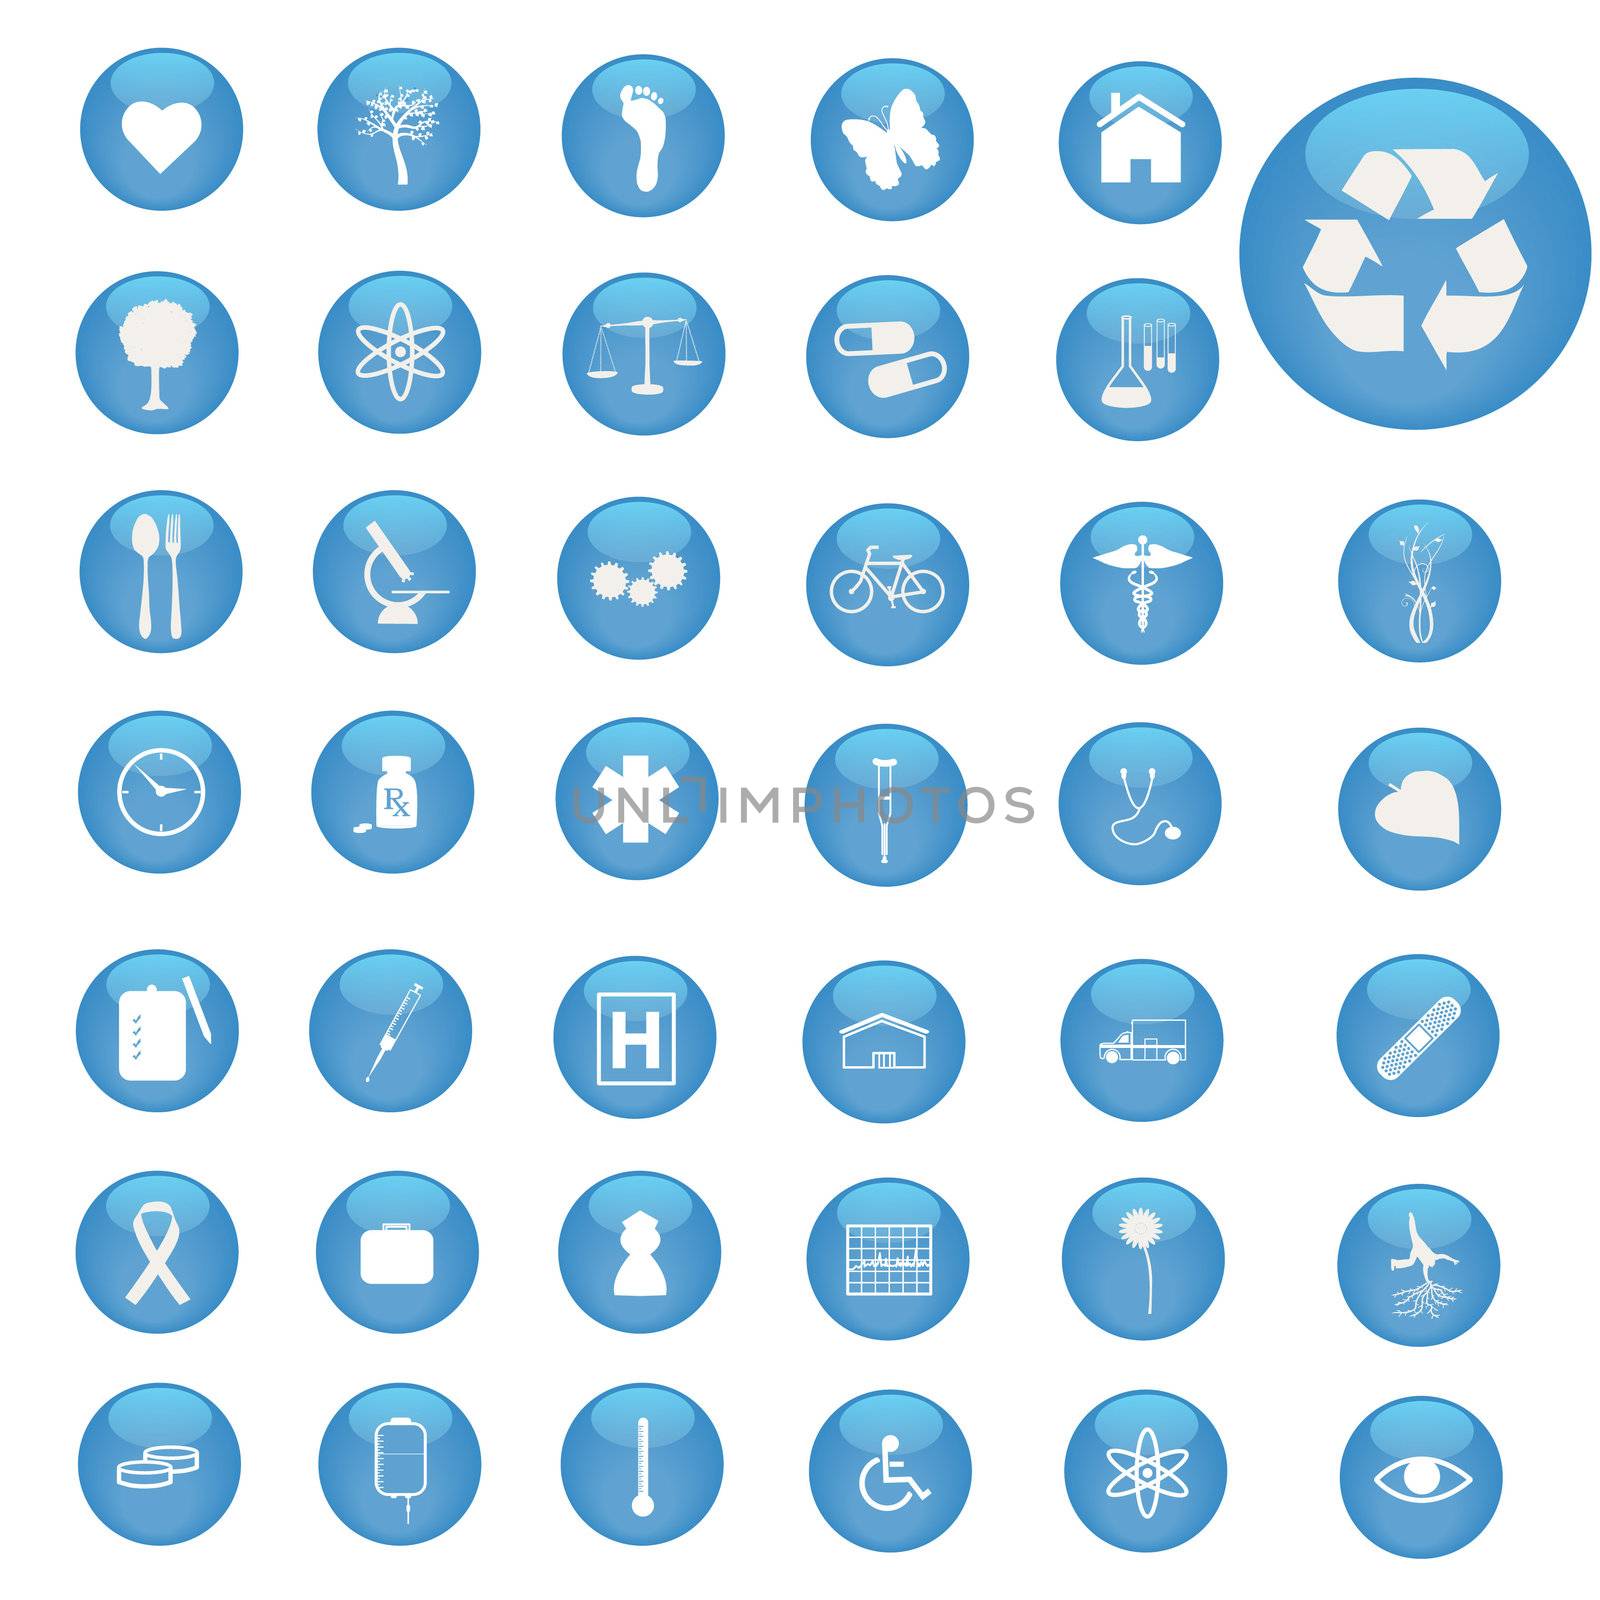 Image of various icons on blue buttons.